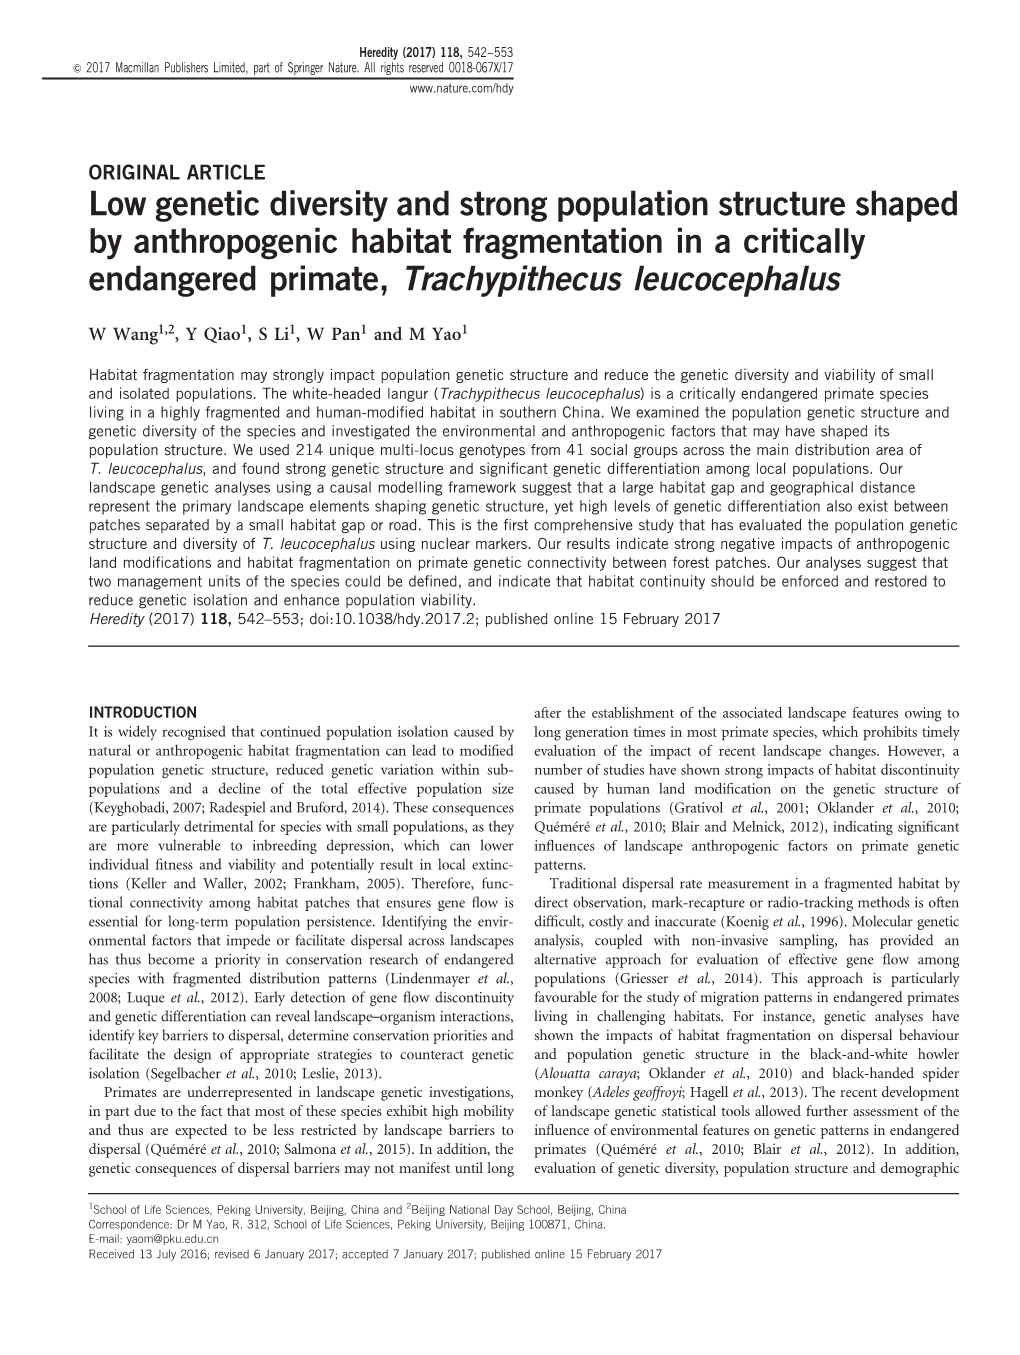 Low Genetic Diversity and Strong Population Structure Shaped by Anthropogenic Habitat Fragmentation in a Critically Endangered Primate, Trachypithecus Leucocephalus